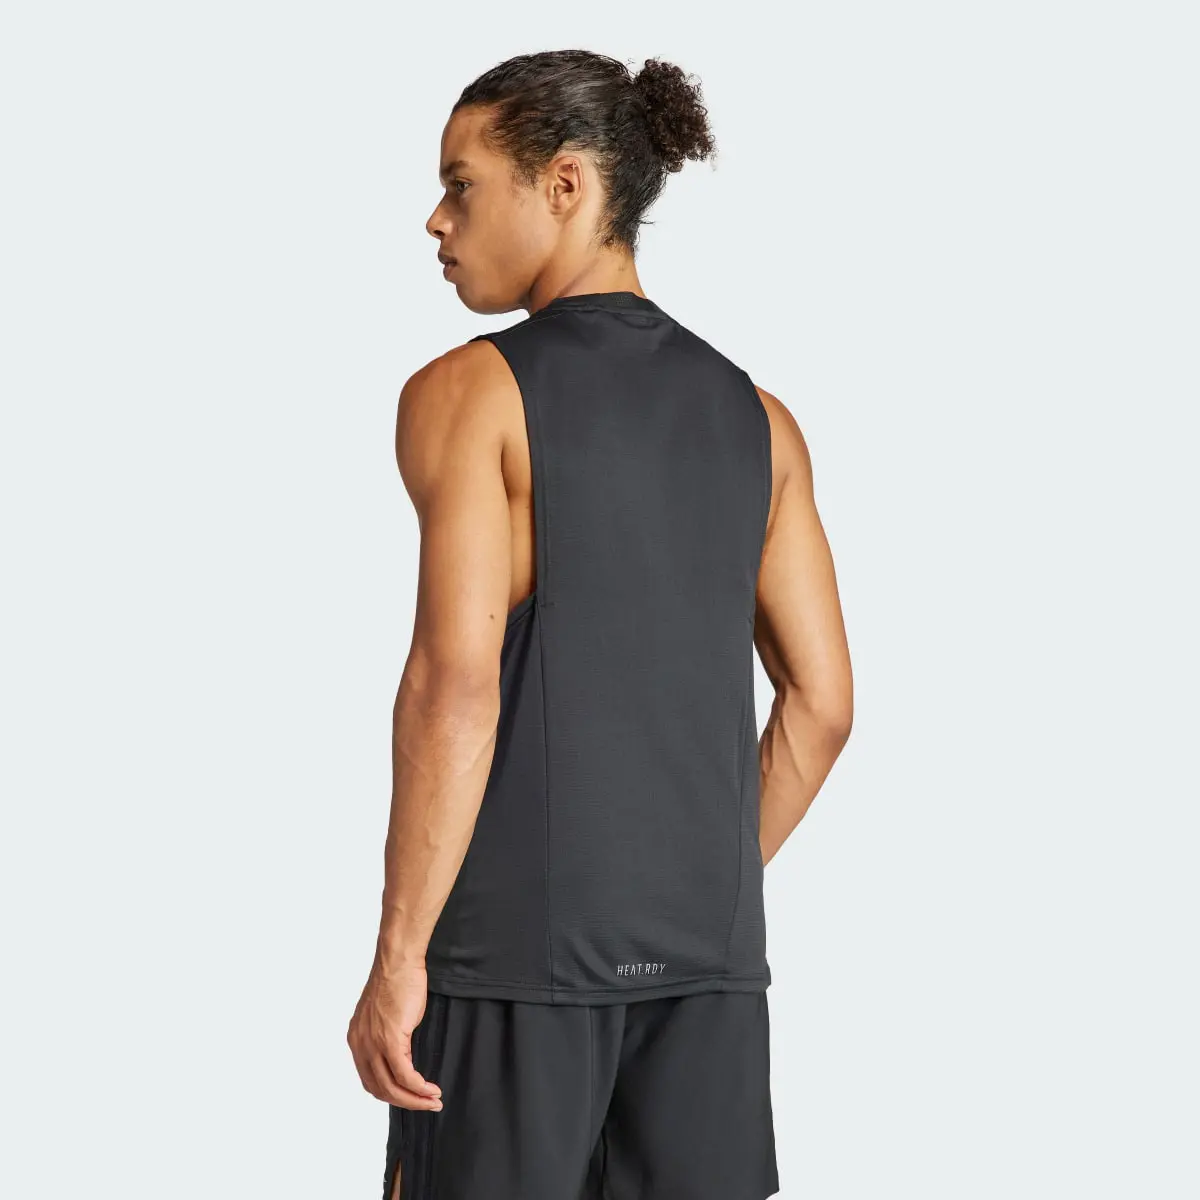 Adidas Designed for Training Workout HEAT.RDY Tank Top. 3